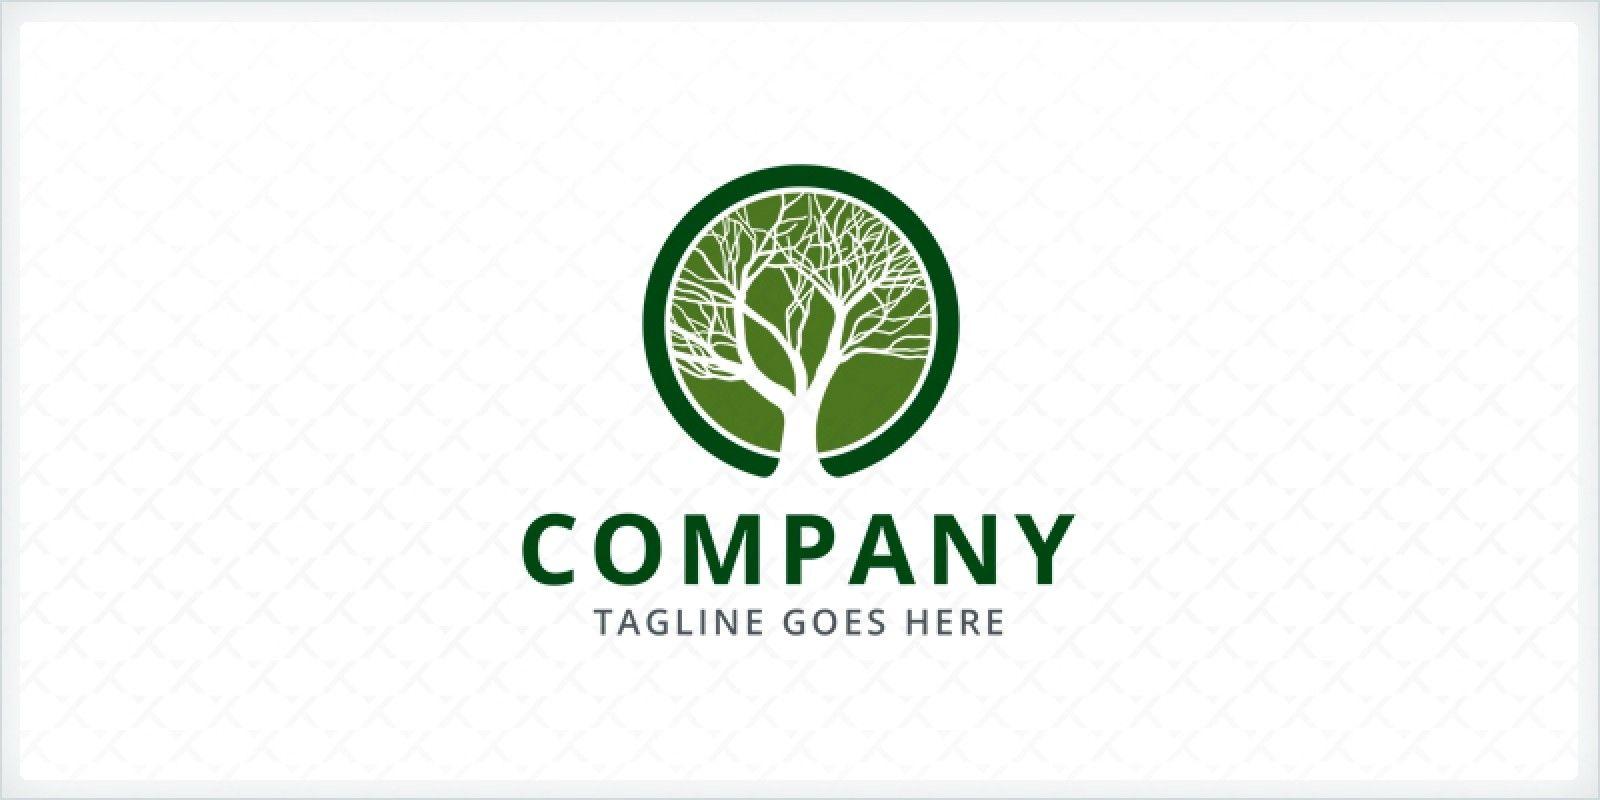 Branches Logo - Tree Branches Logo Template